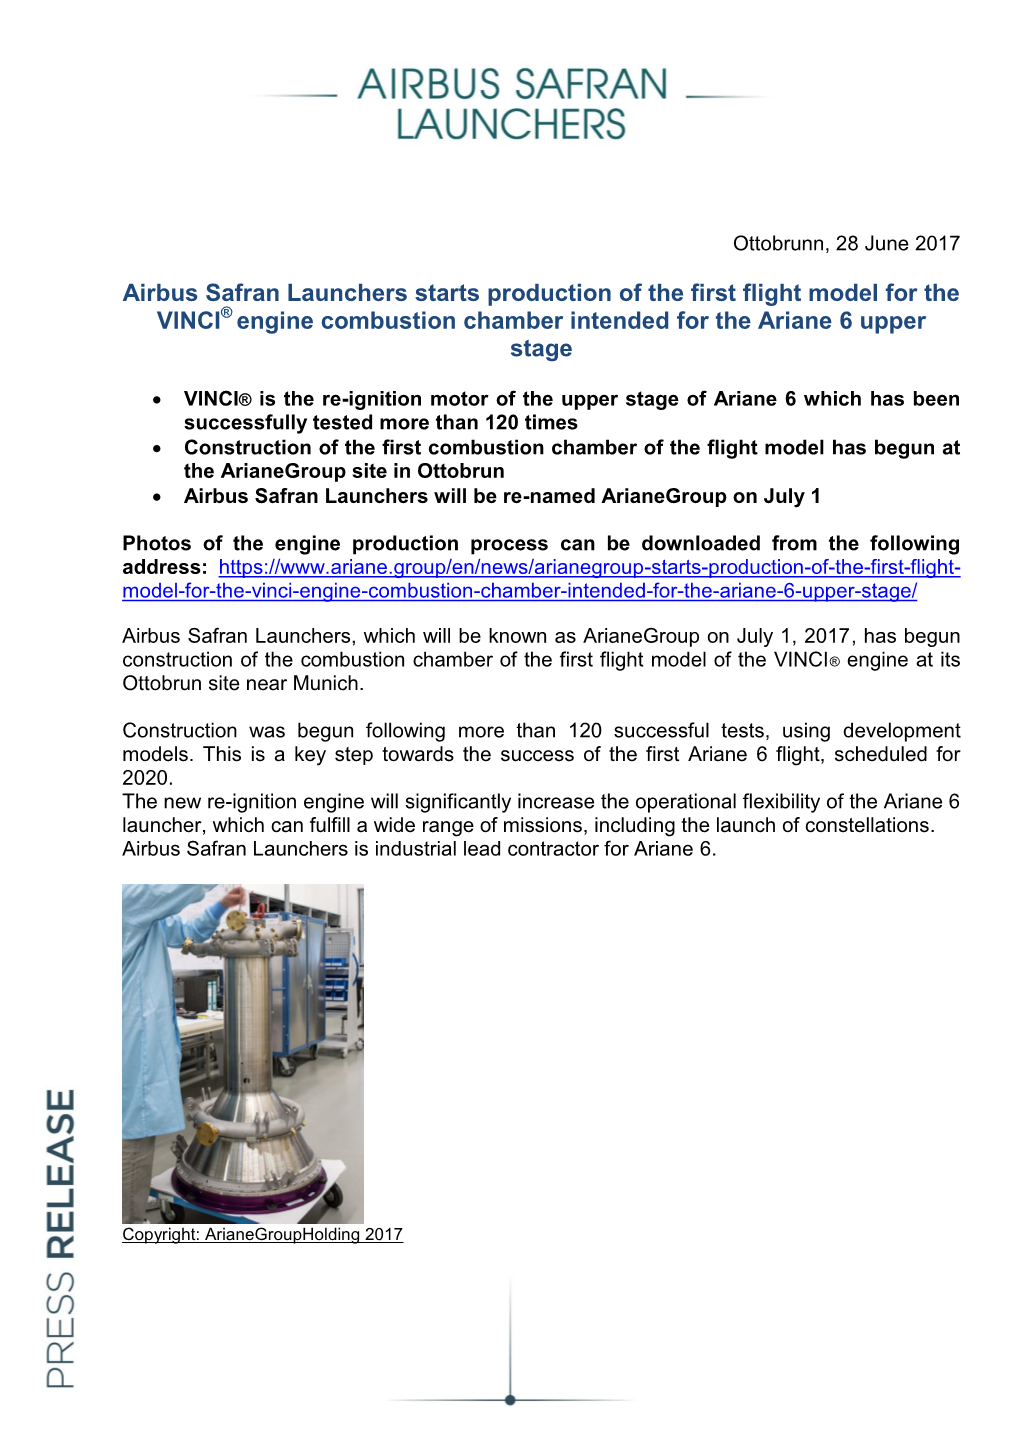 Airbus Safran Launchers Starts Production of the First Flight Model for the VINCI Engine Combustion Chamber Intended for The